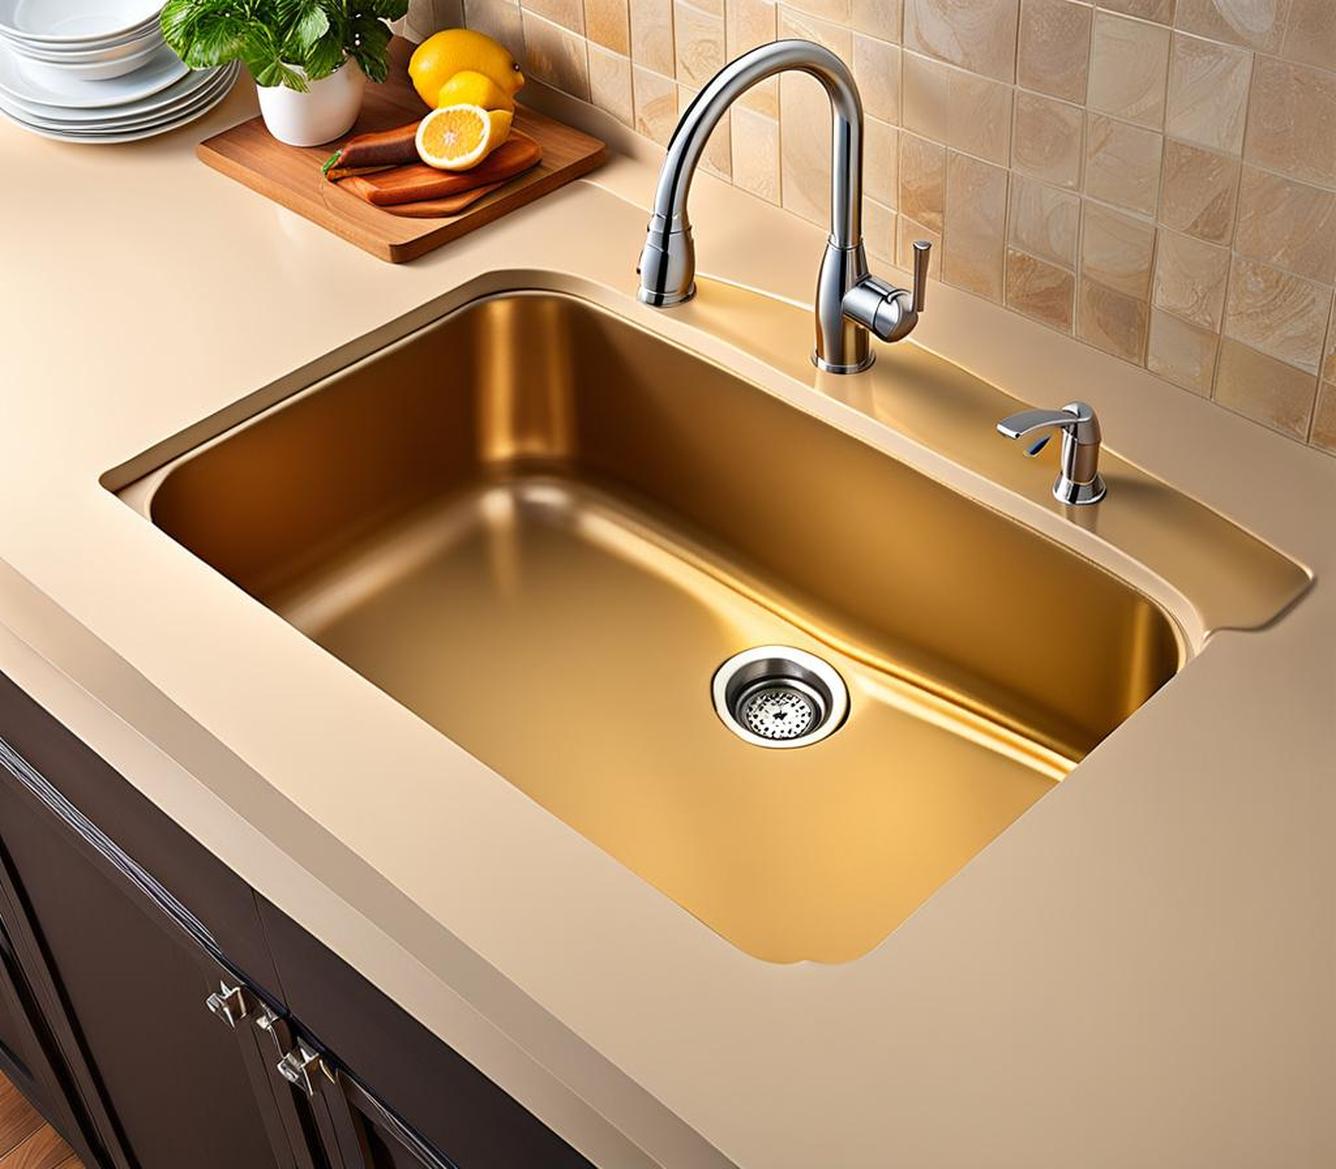 how to seal kitchen sink drain